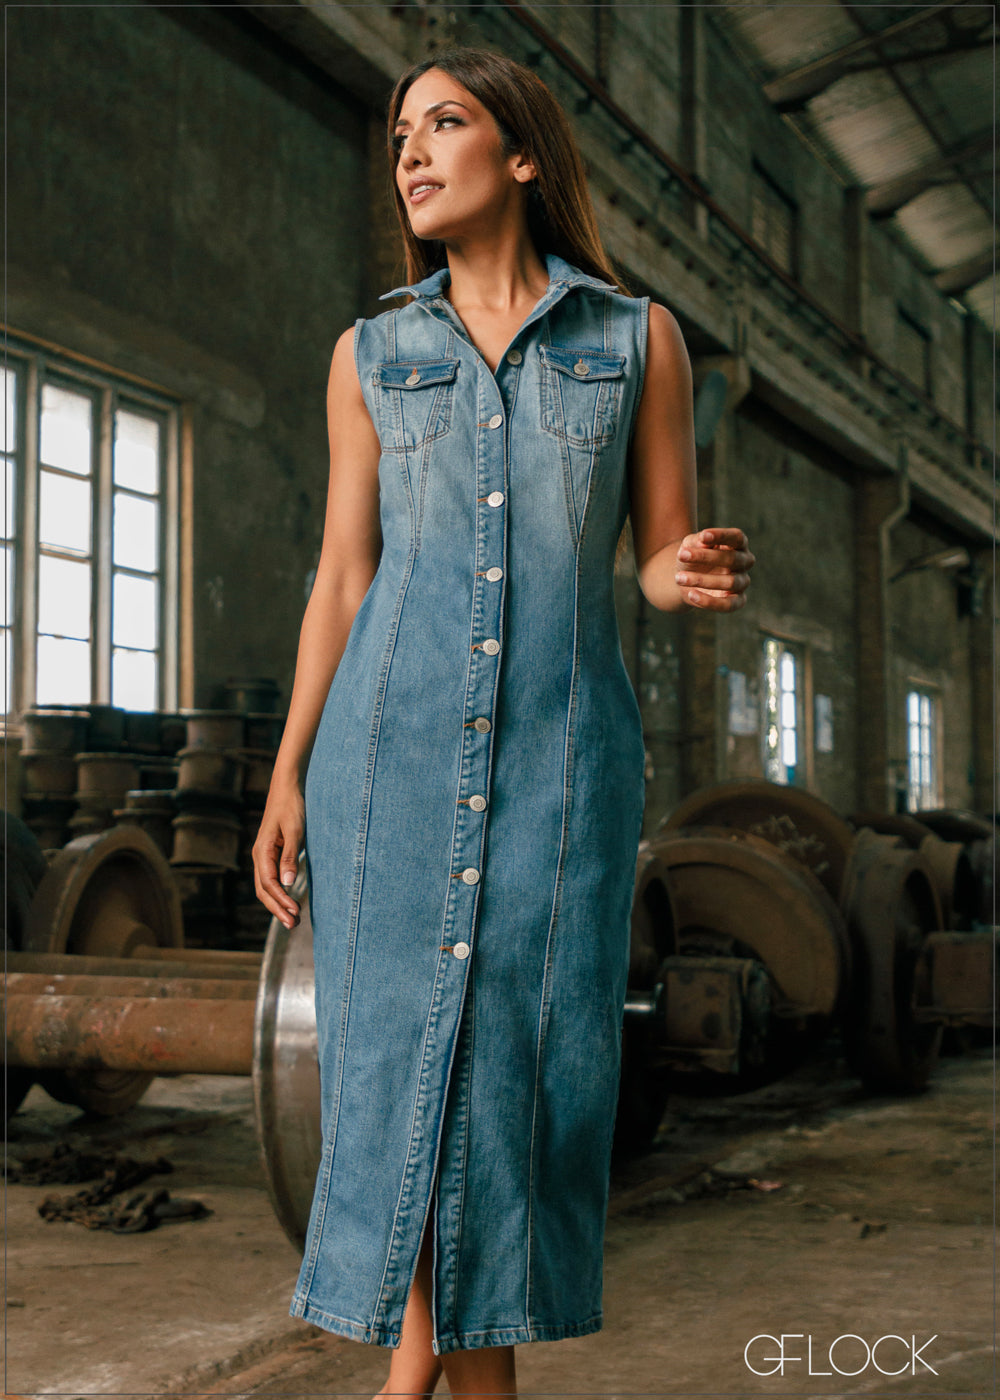 Shop Denim Dresses for Women That'll Take You Straight From Summer to Fall  | Vogue